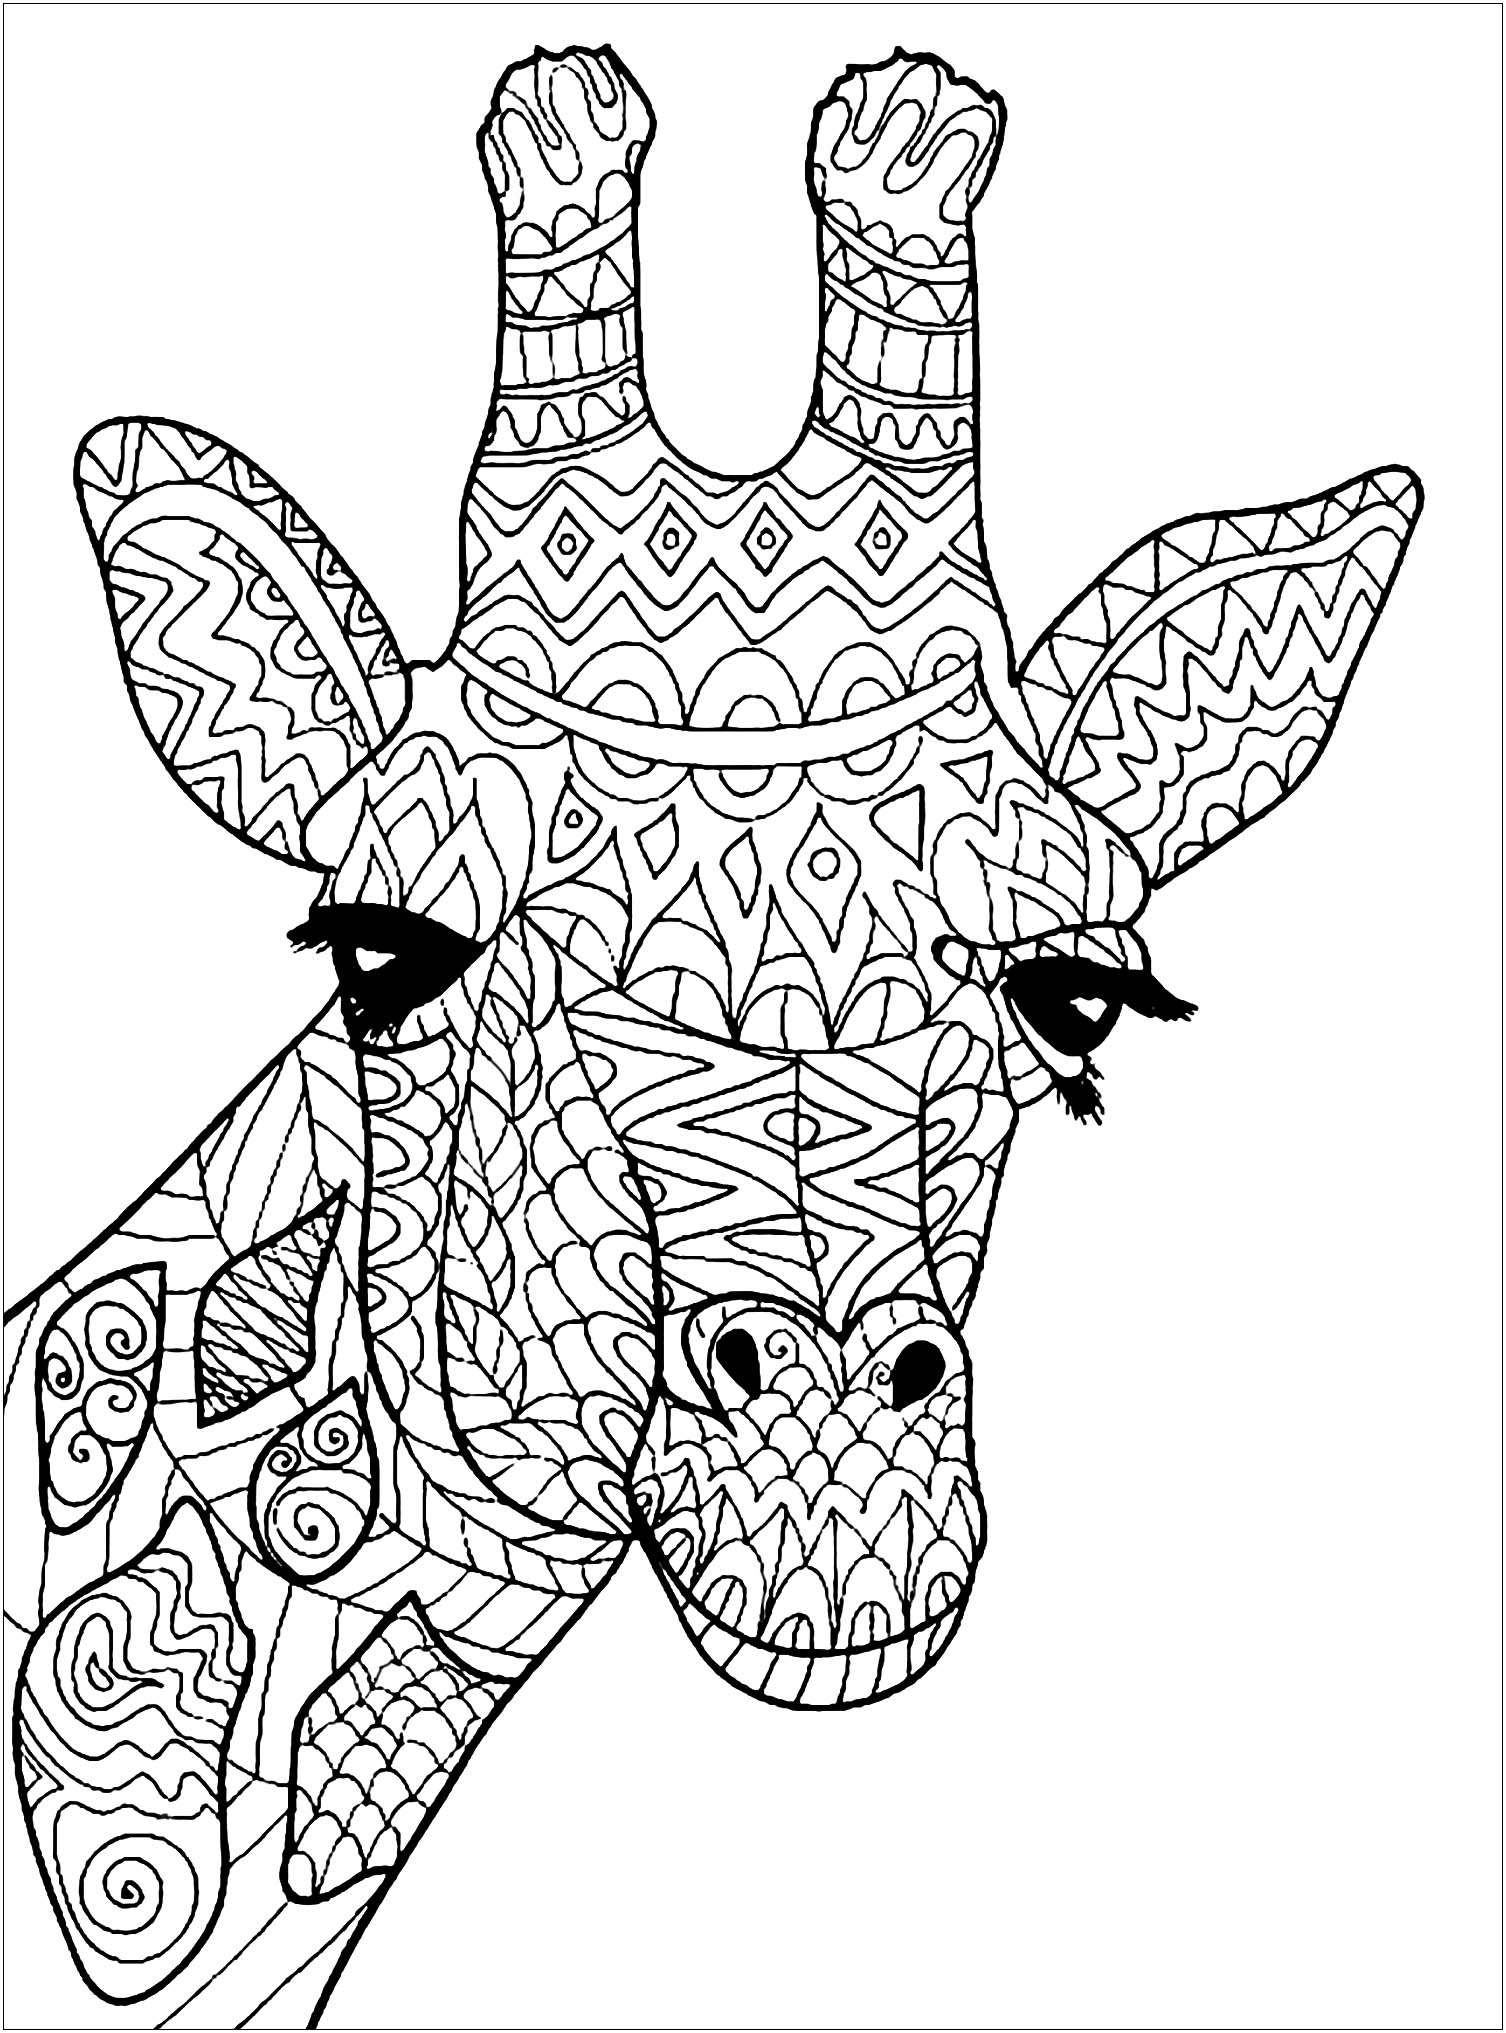 Download 23 Best Giraffe Coloring Pages for Adults - Home, Family ...